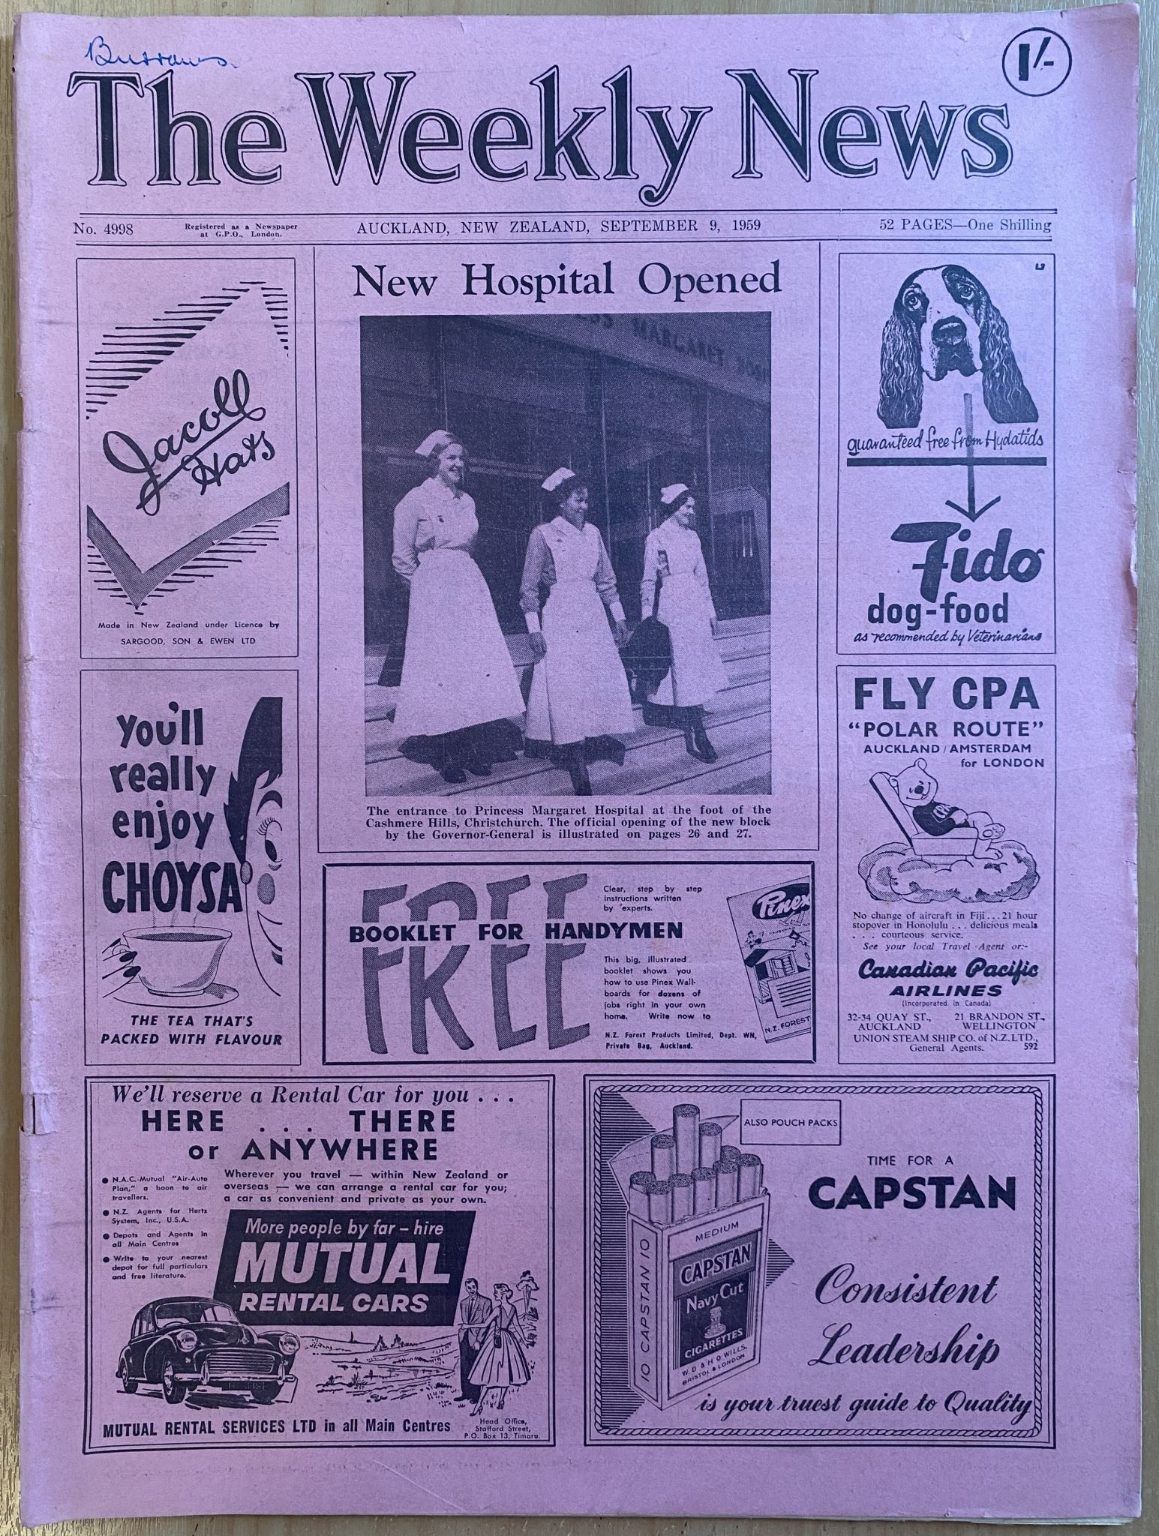 OLD NEWSPAPER: The Weekly News - No. 4998, 9 September 1959